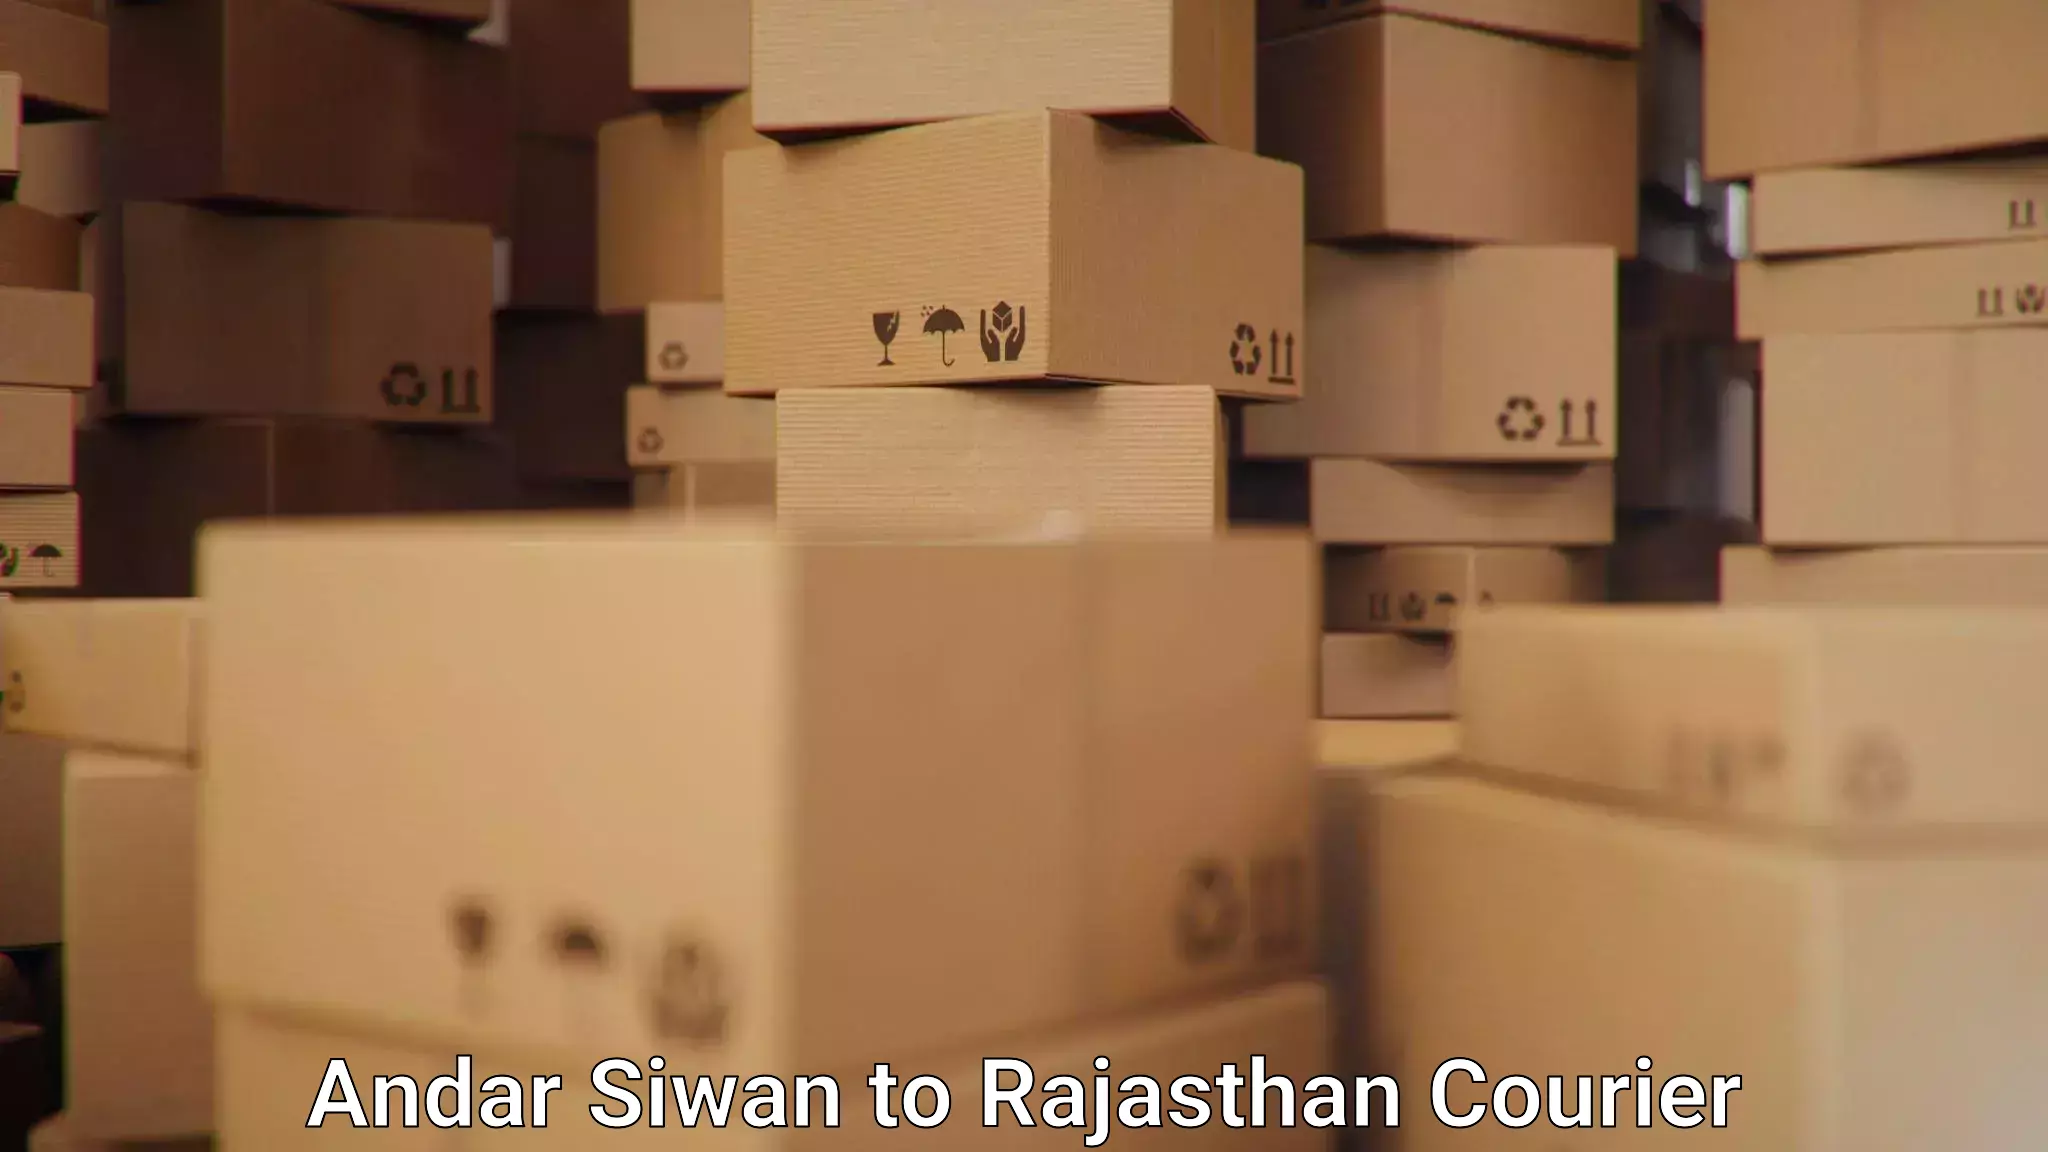 Courier service partnerships Andar Siwan to Yeswanthapur